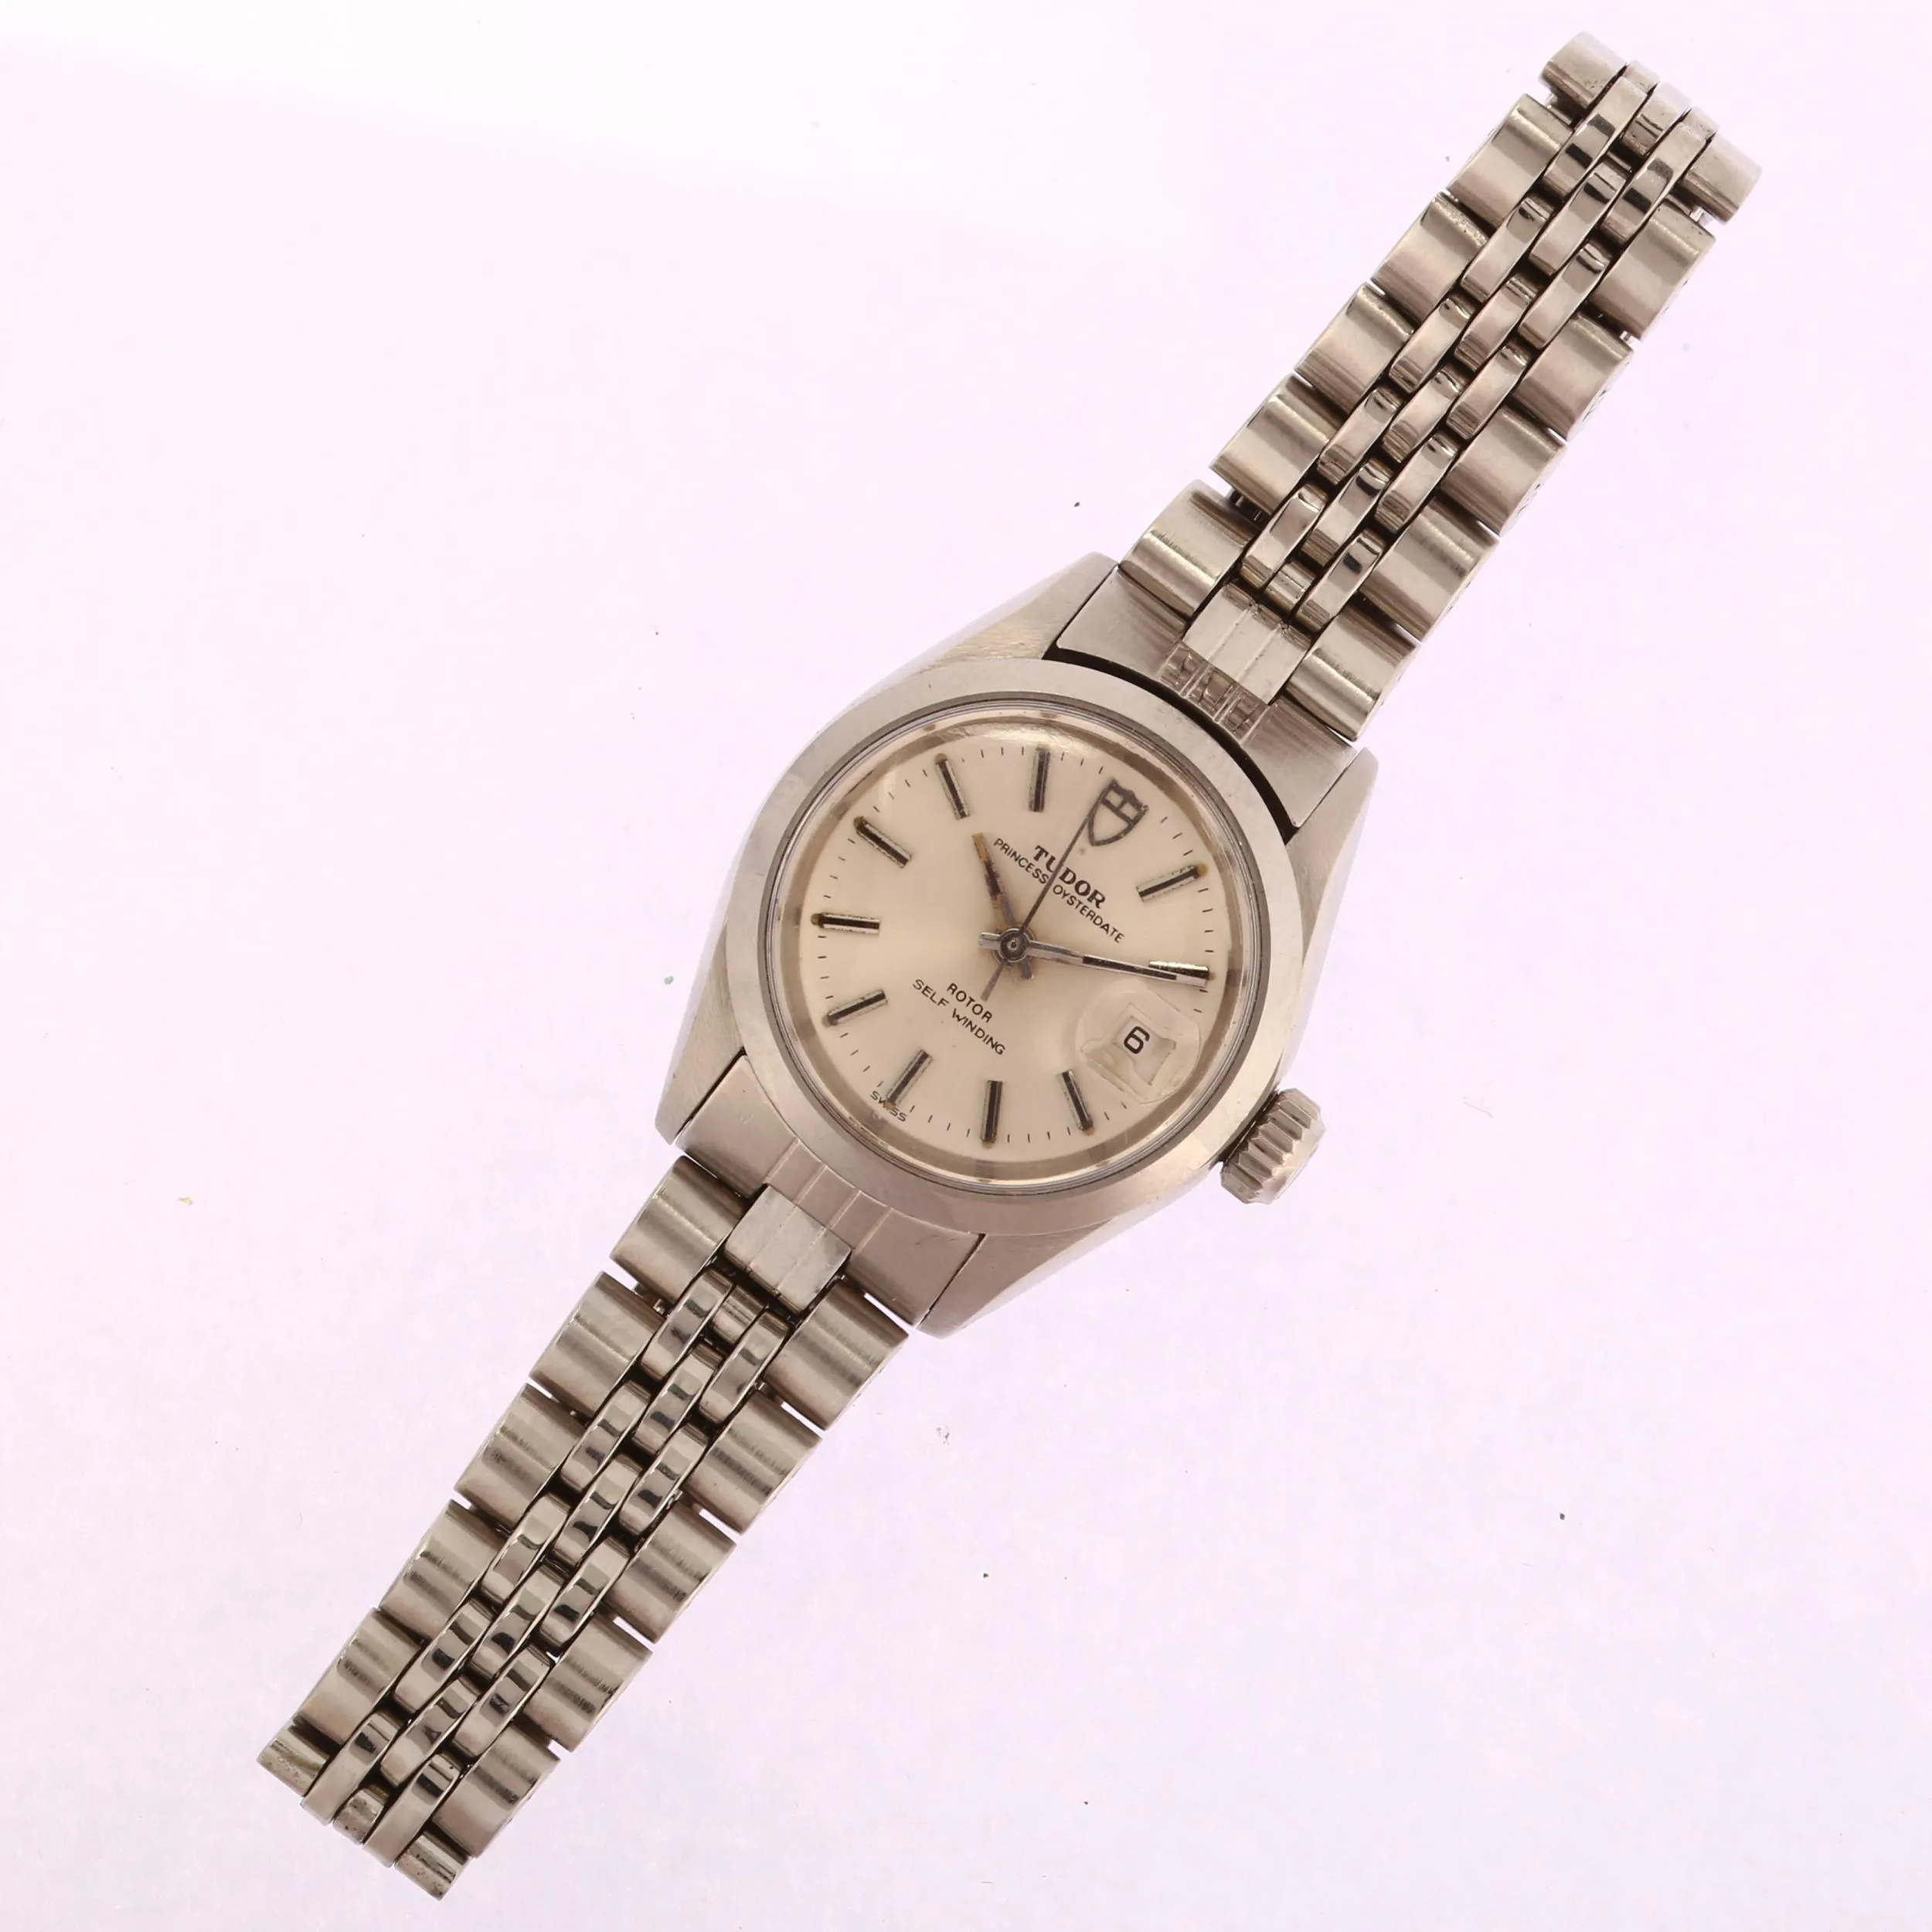 Tudor Princess Oysterdate 92400 25mm Stainless steel Silver 1